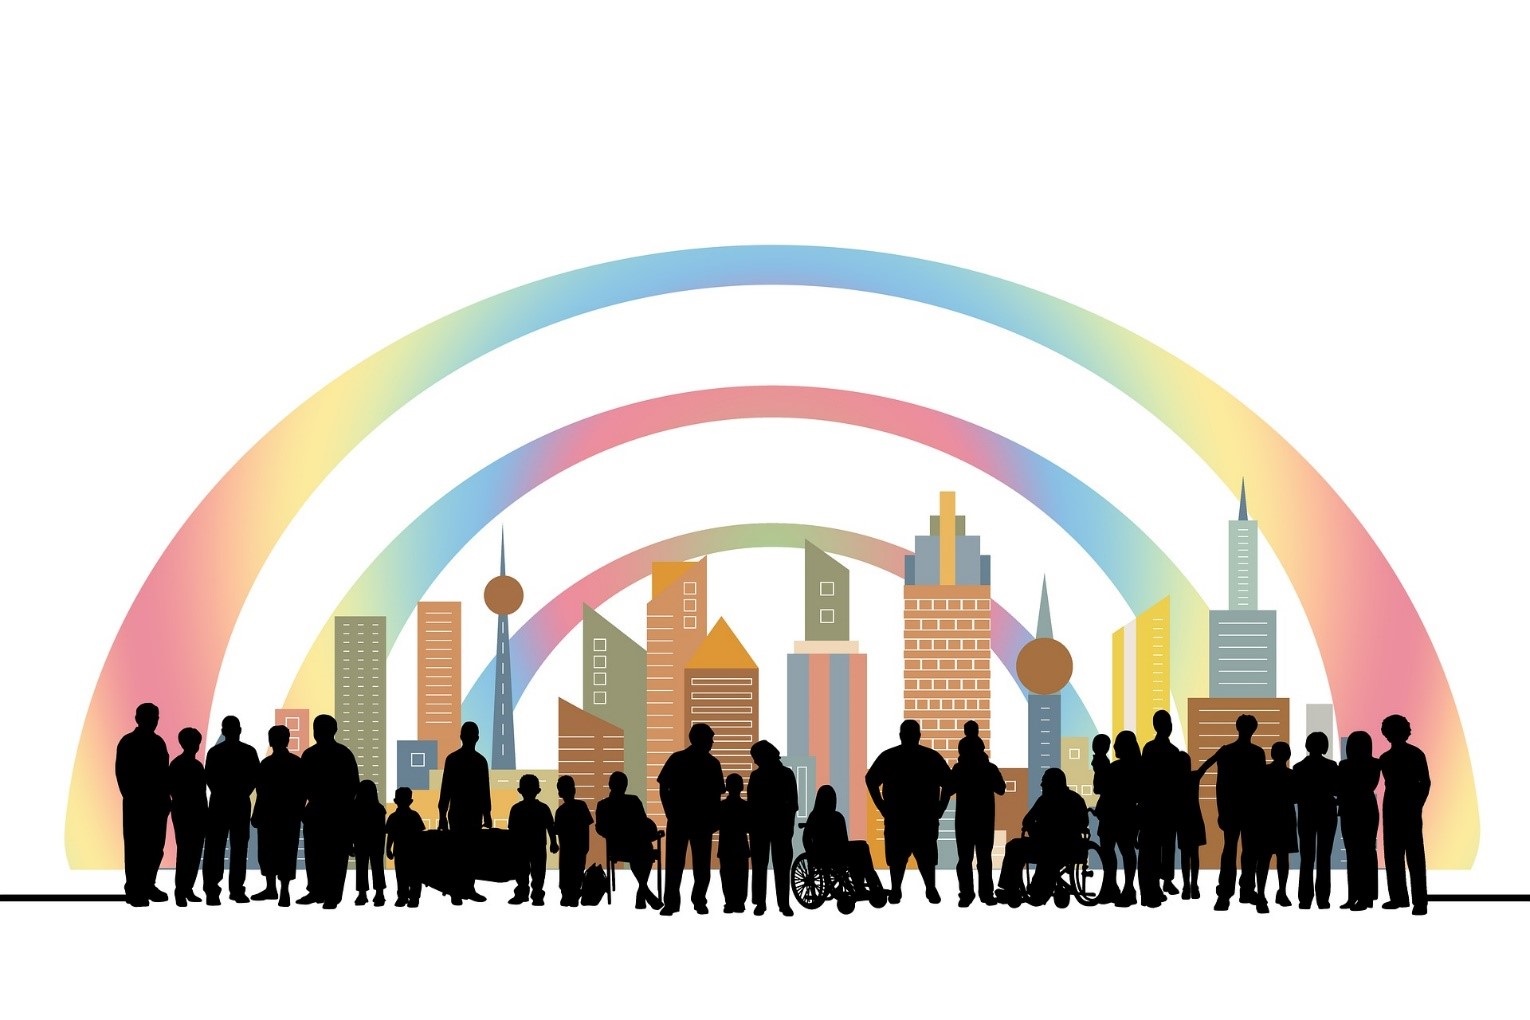 The silhouette of a city with a rainbow and a group of people